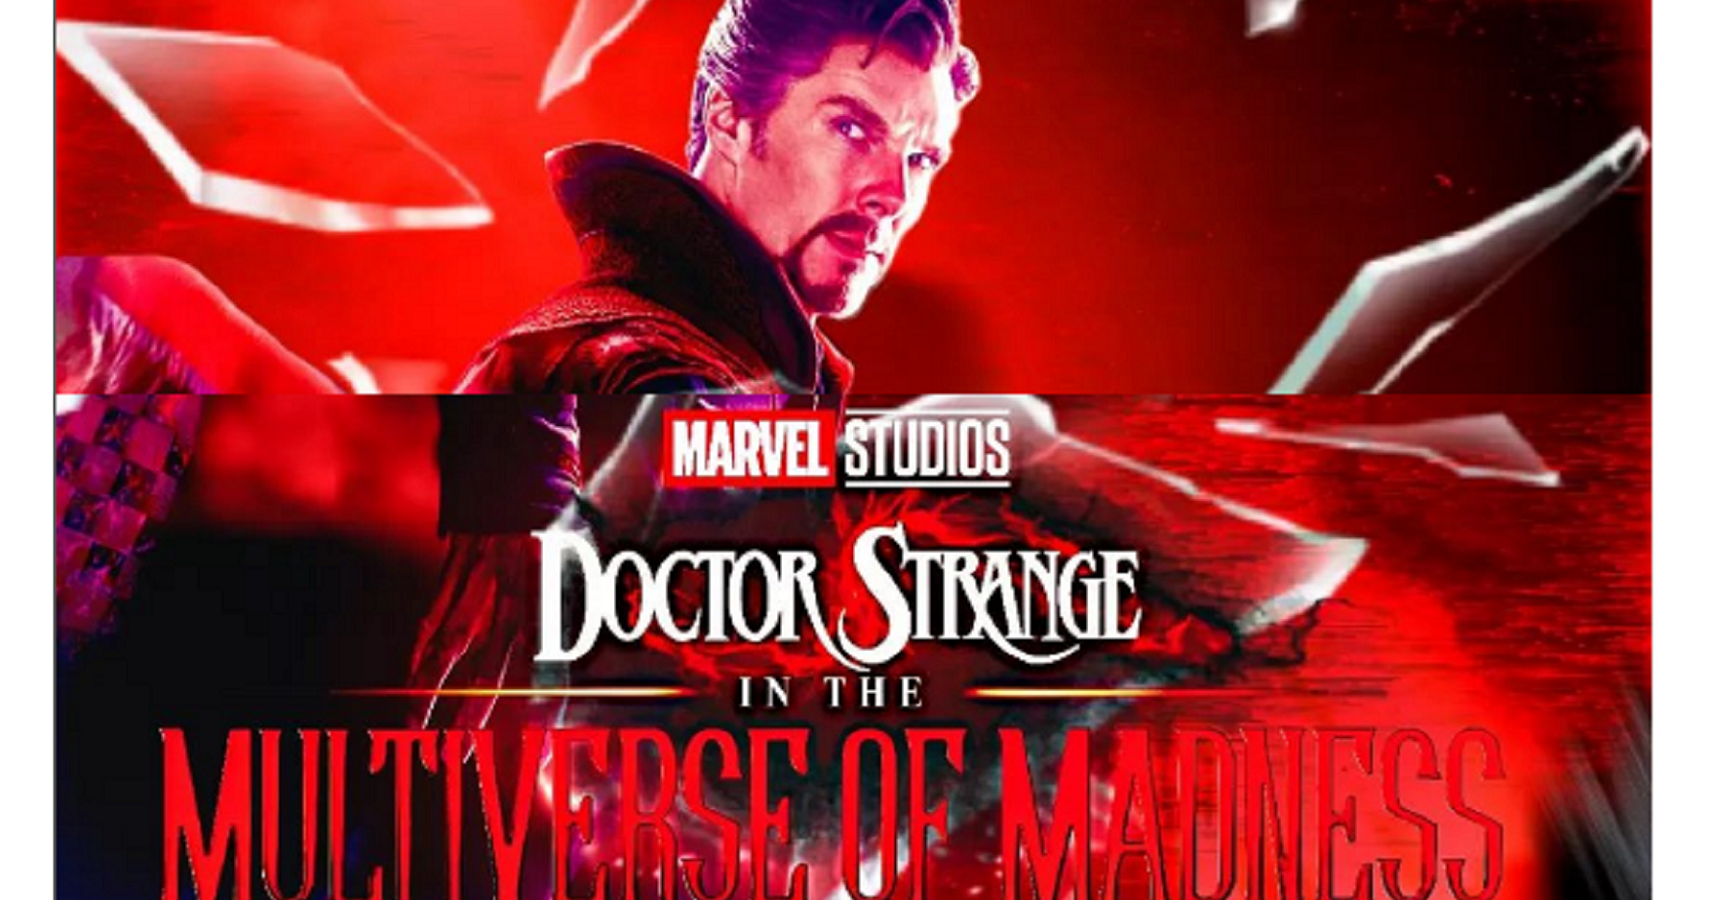 Net Worth Of The Cast Of 'Doctor Strange in the Multiverse of Madness', Ranked